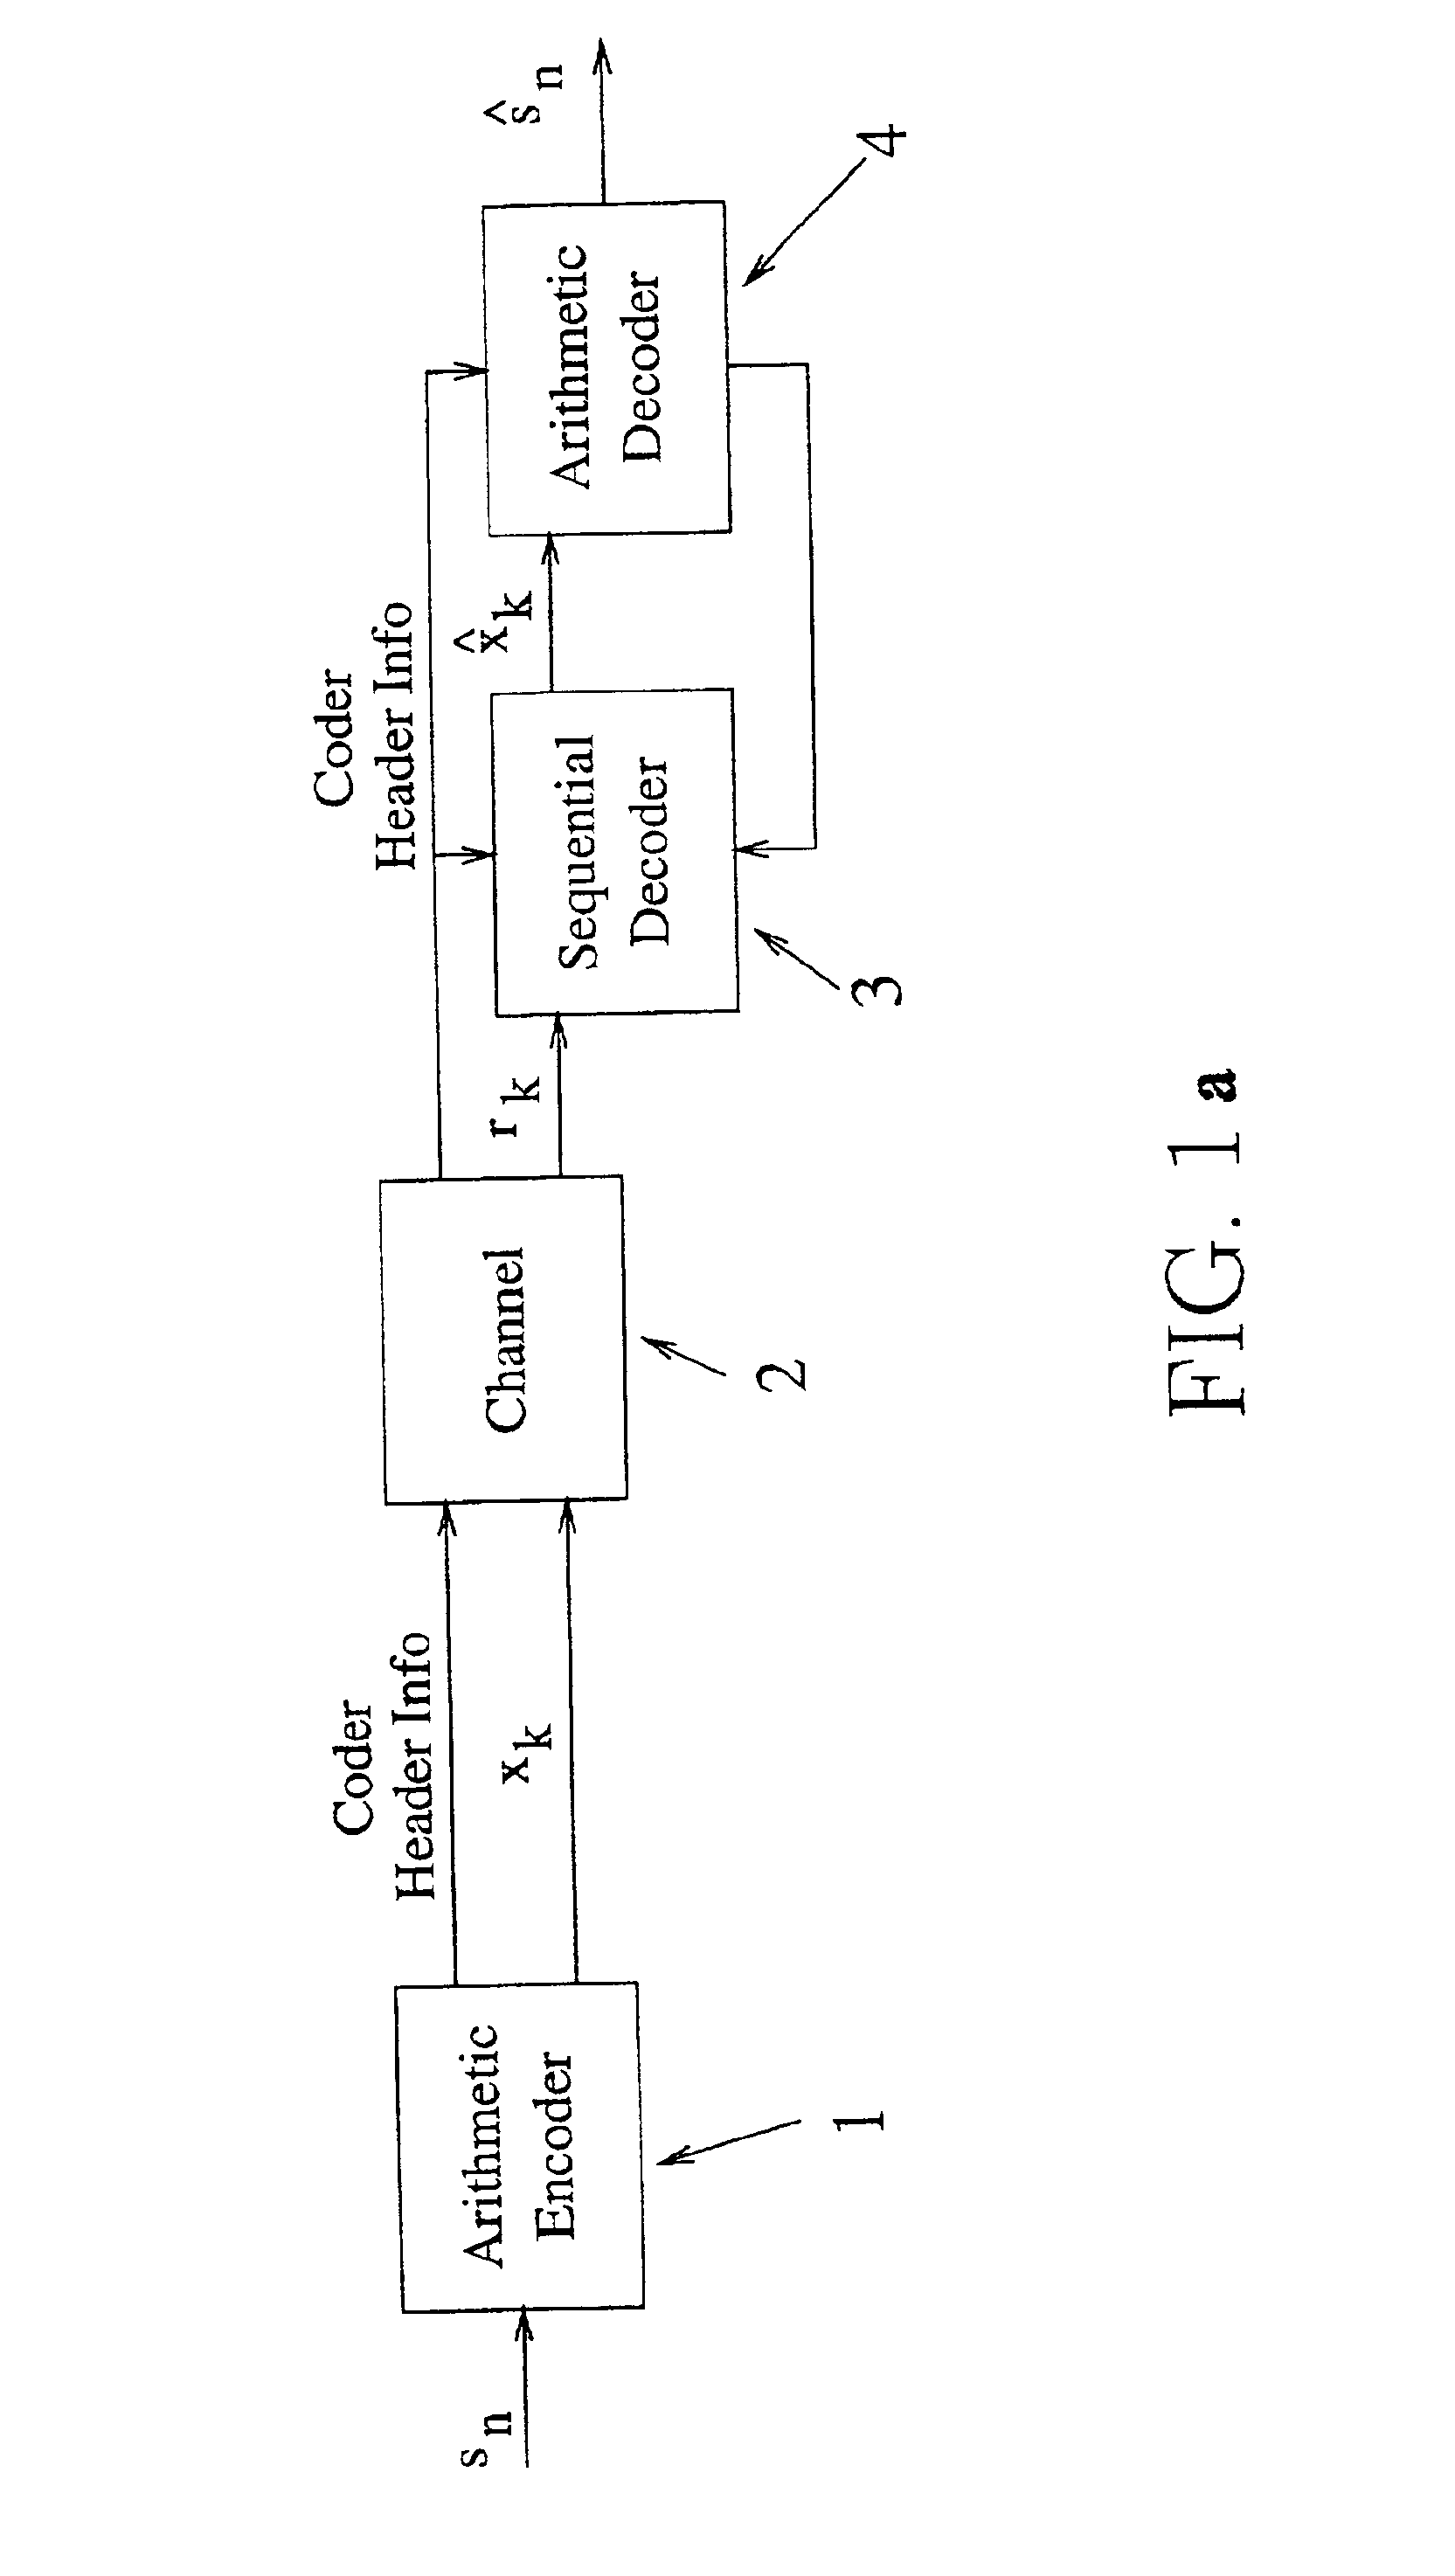 System and method for joint source-channel encoding, with symbol decoding and error correction